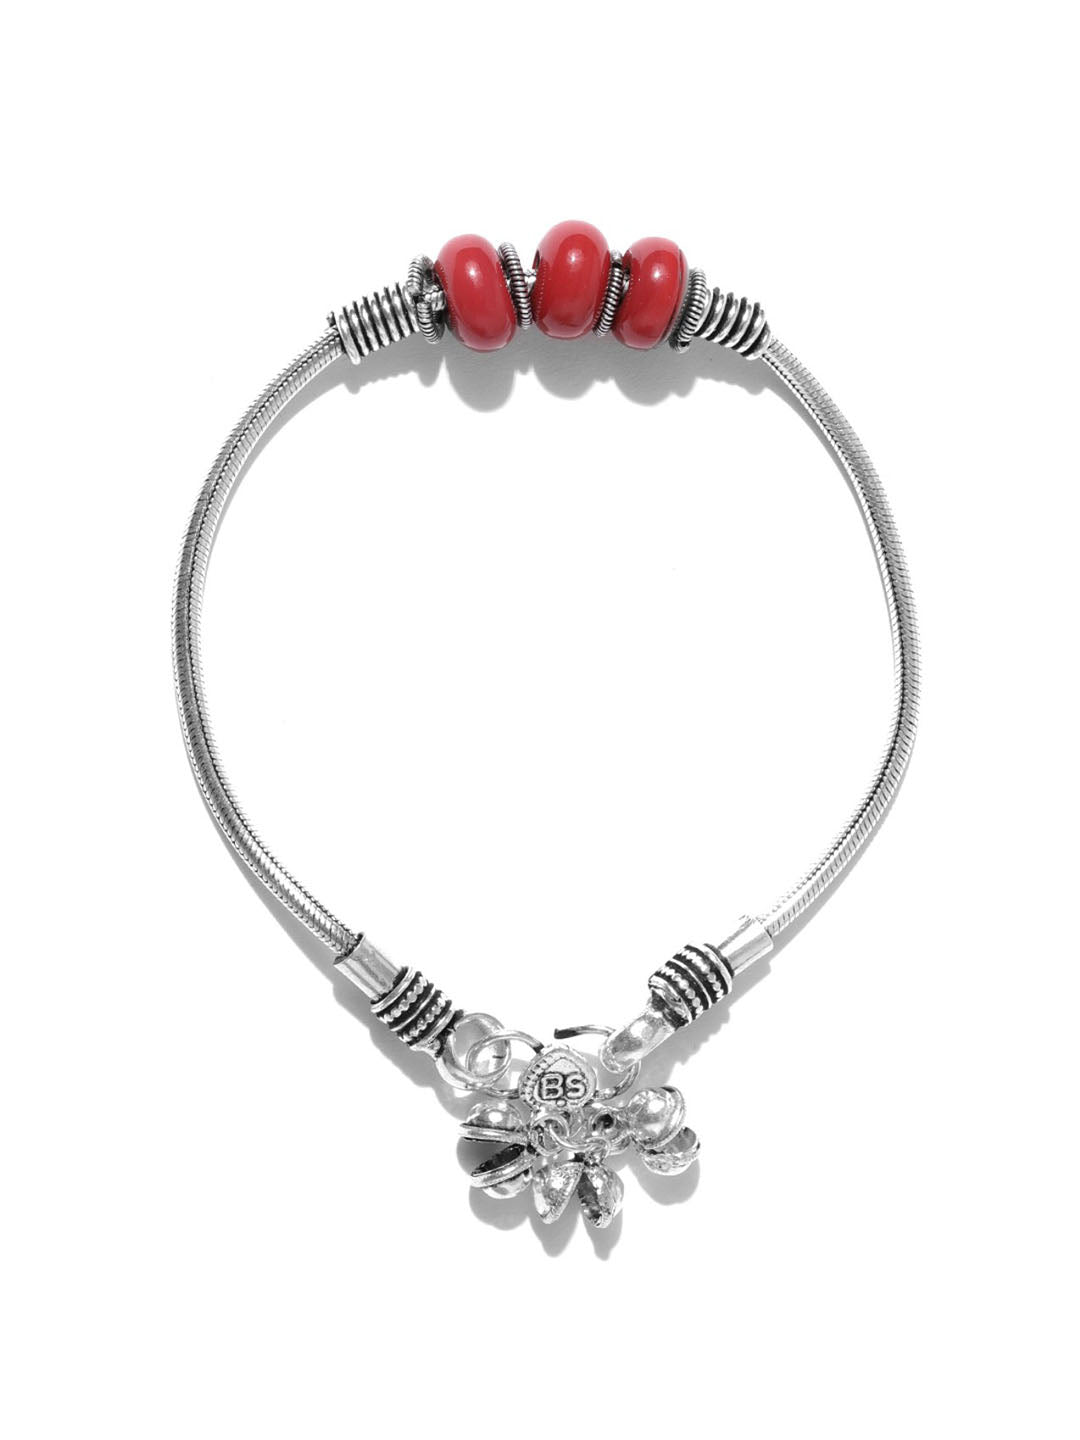 Red Beaded Beauty - Oxidised Silver-Toned Anklets For Women And Girls